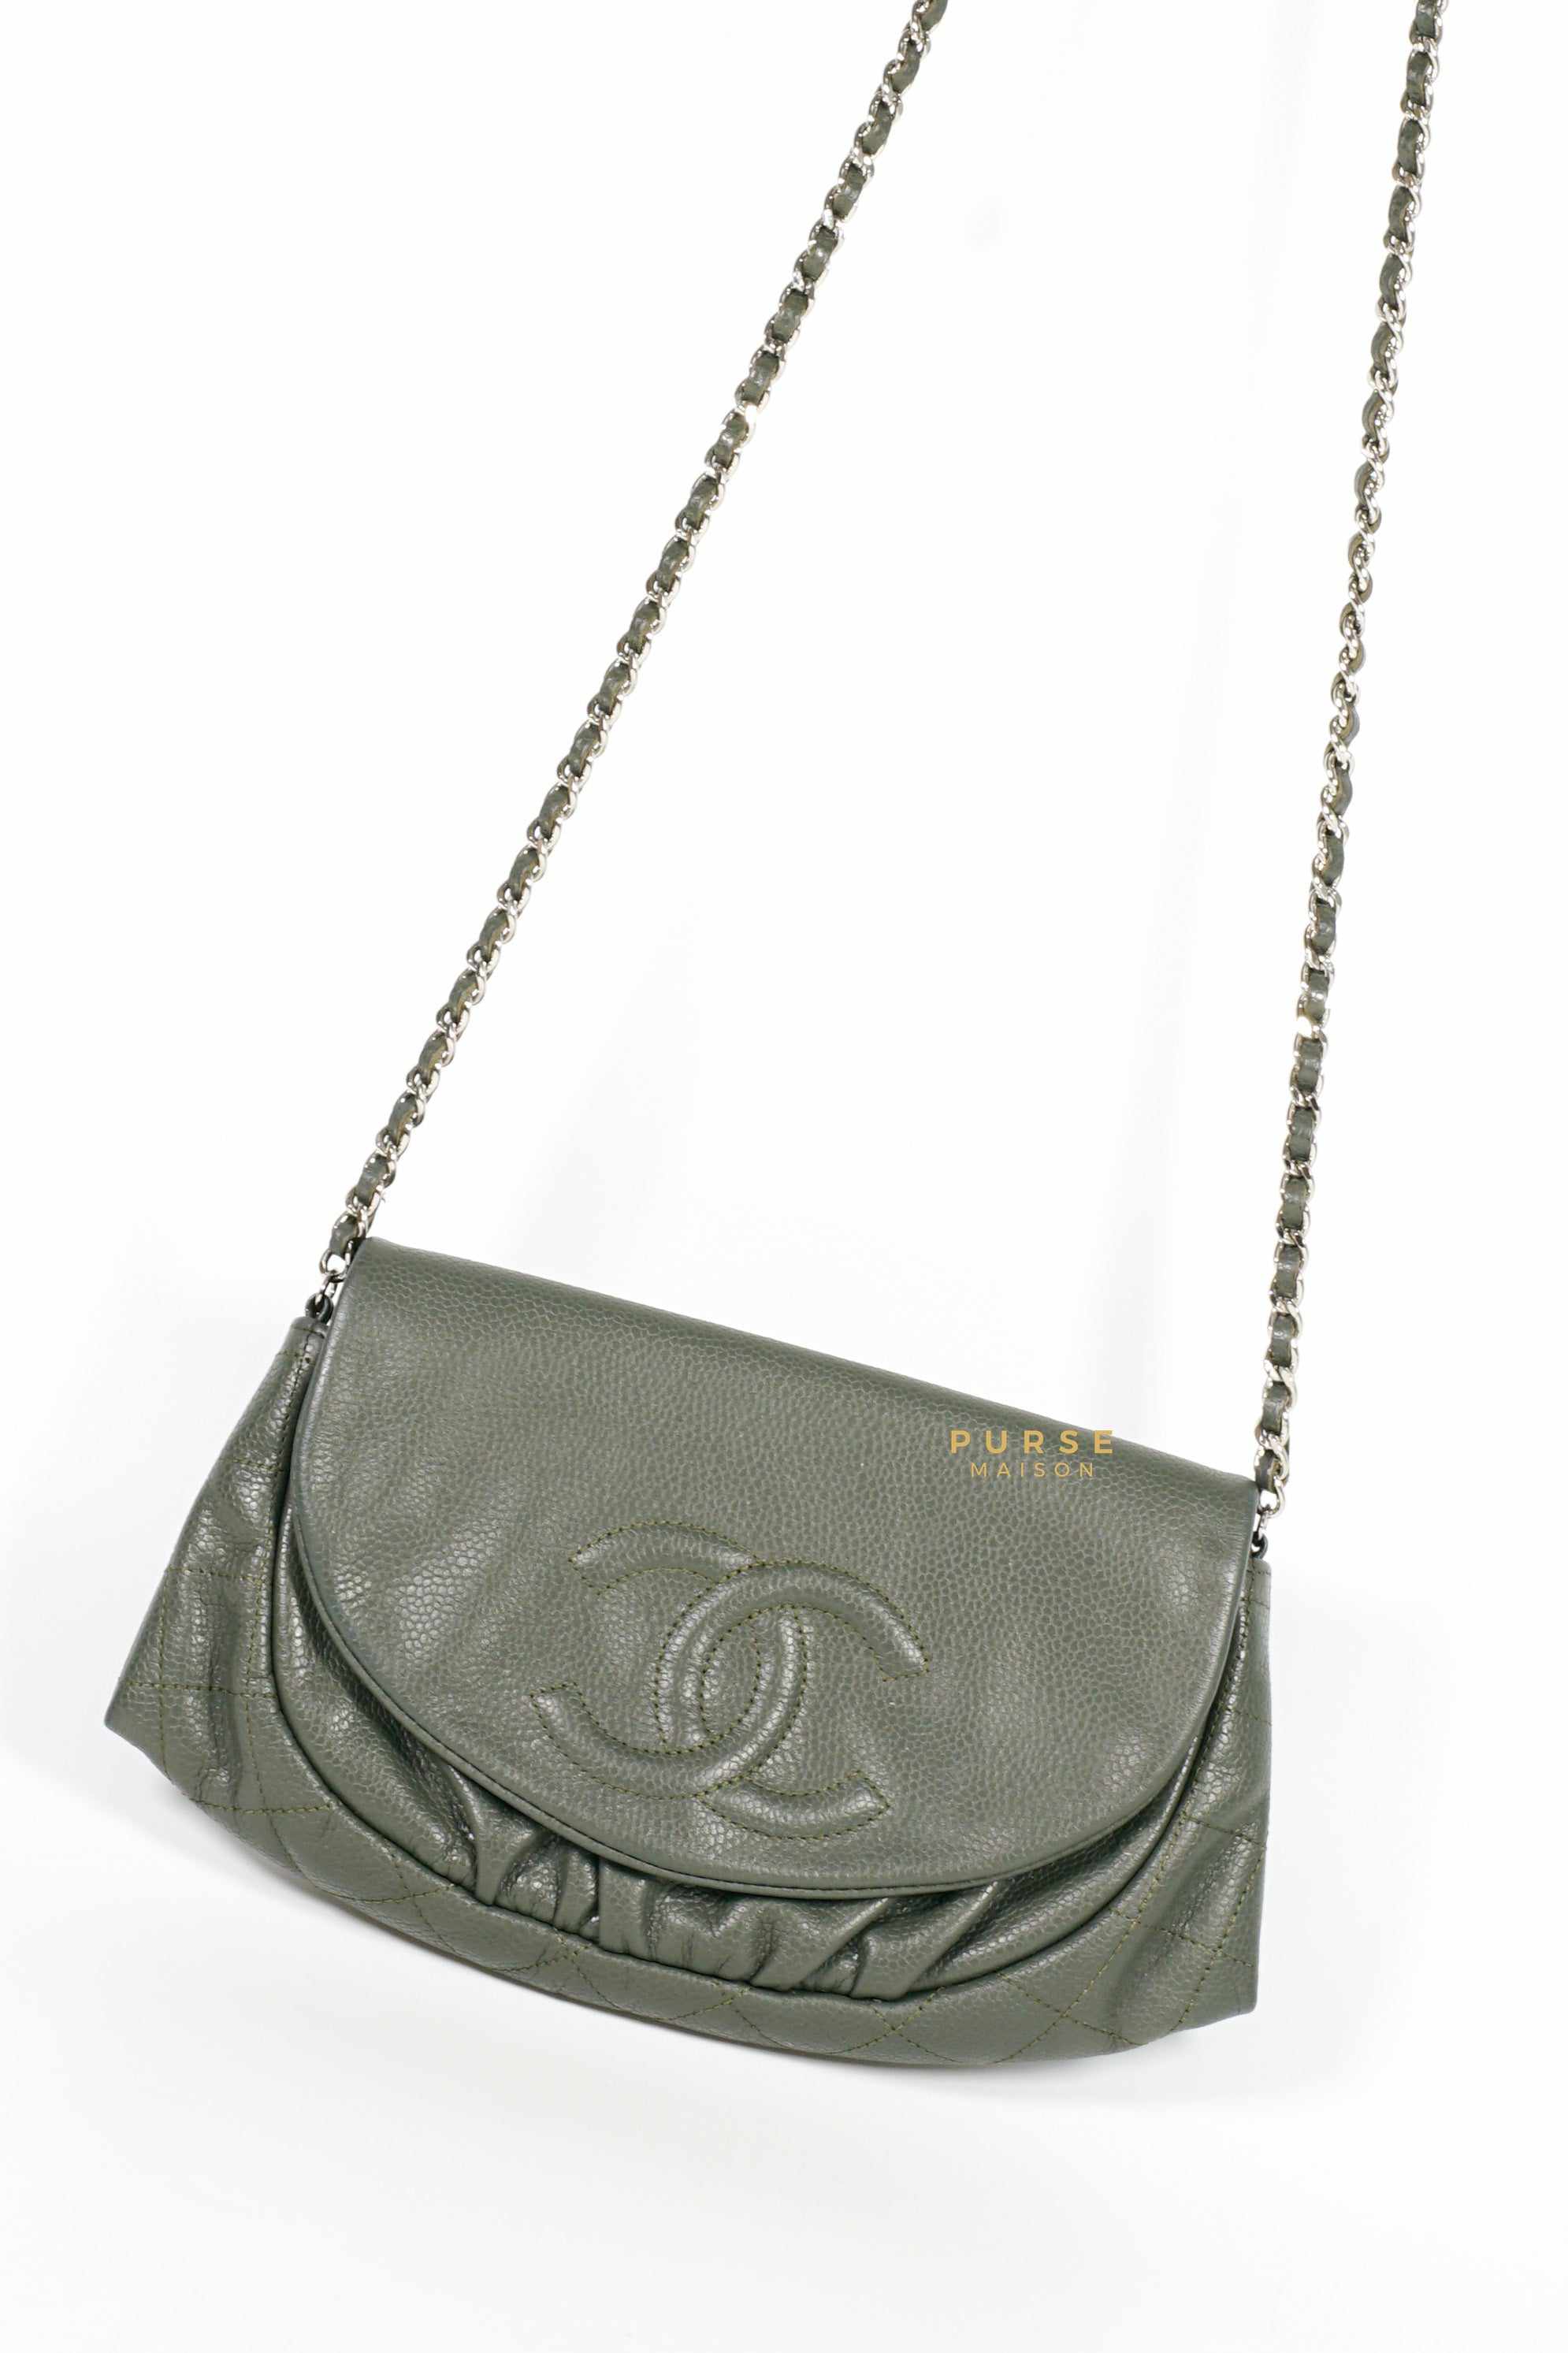 Chanel Half Moon Wallet on Chain in Grey Caviar Leather and Silver Hardware Series 15